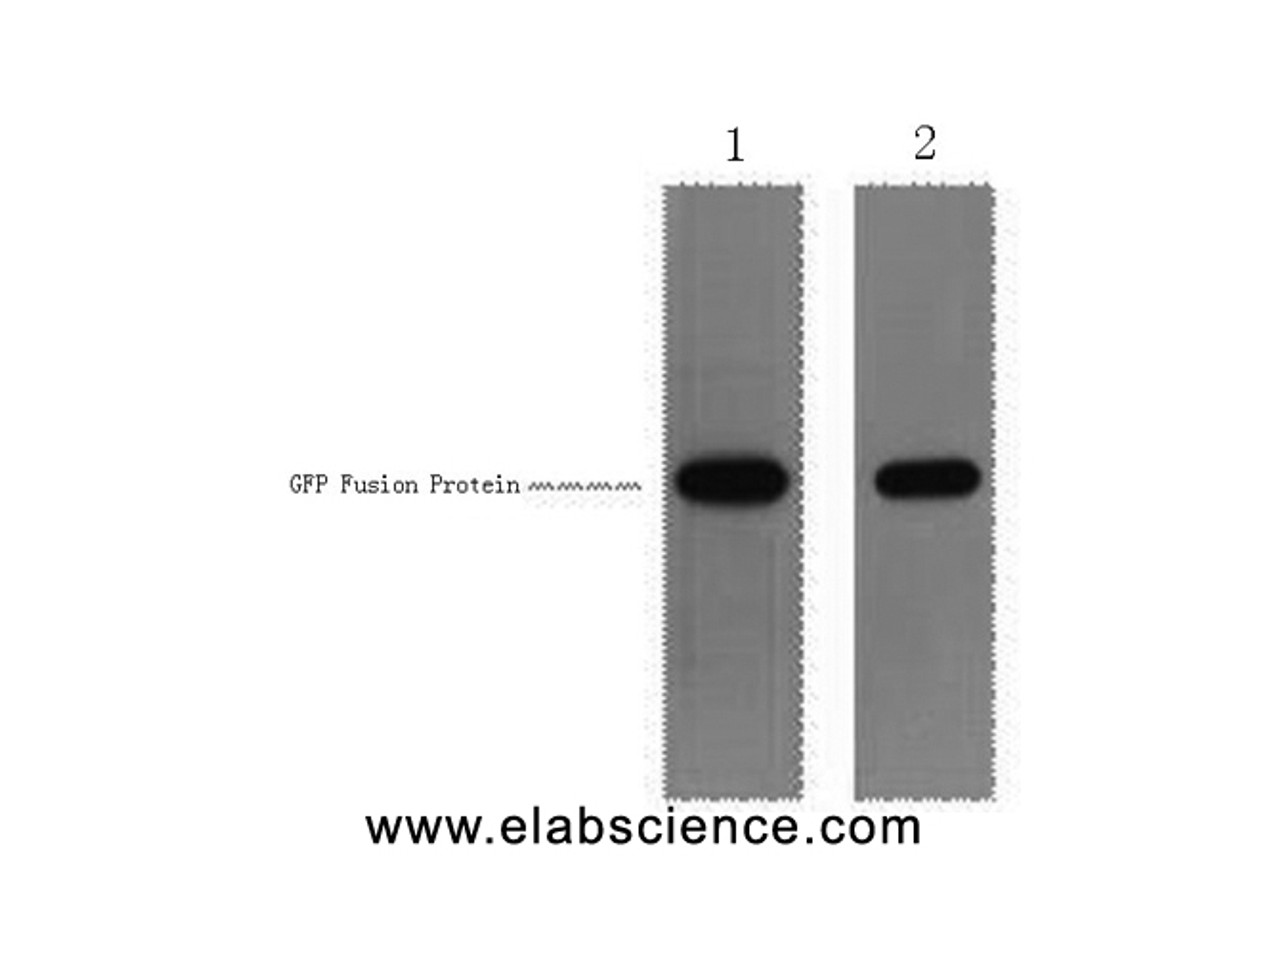 Western Blot analysis of 1ug GFP fusion protein using GFP-Tag Polyclonal Antibody at dilution of 1) 1:5000 2) 1:1000.